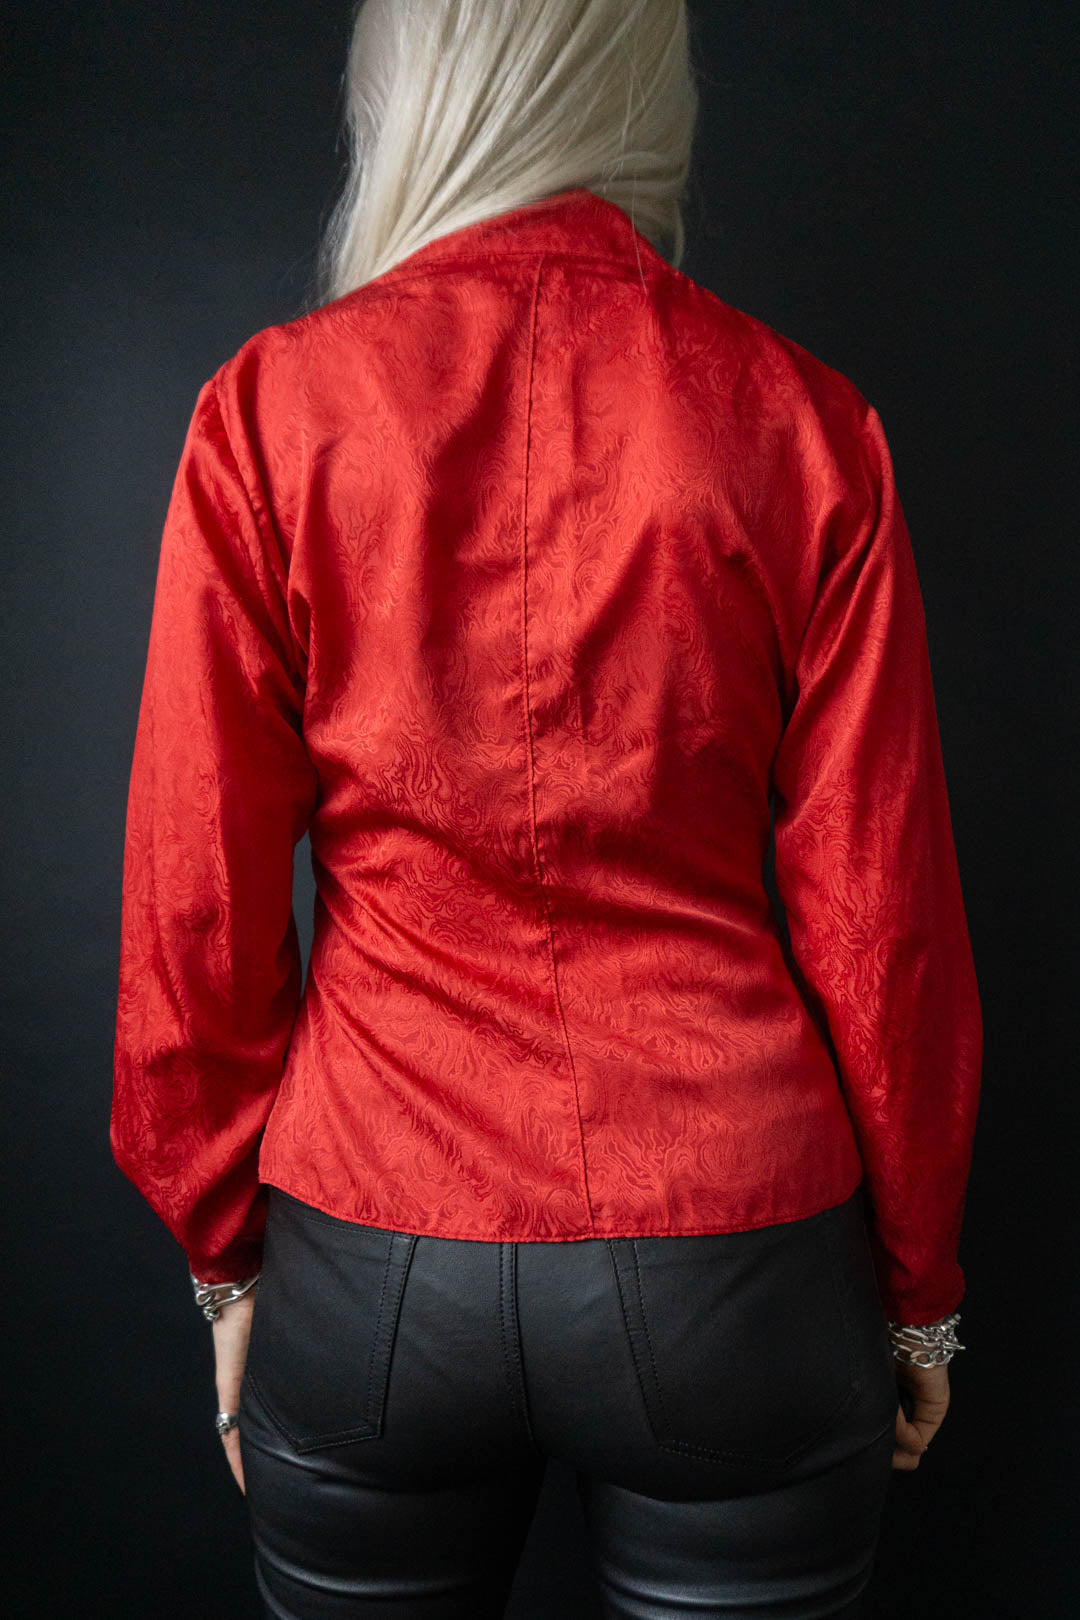 Bluse Seide Rot Muster